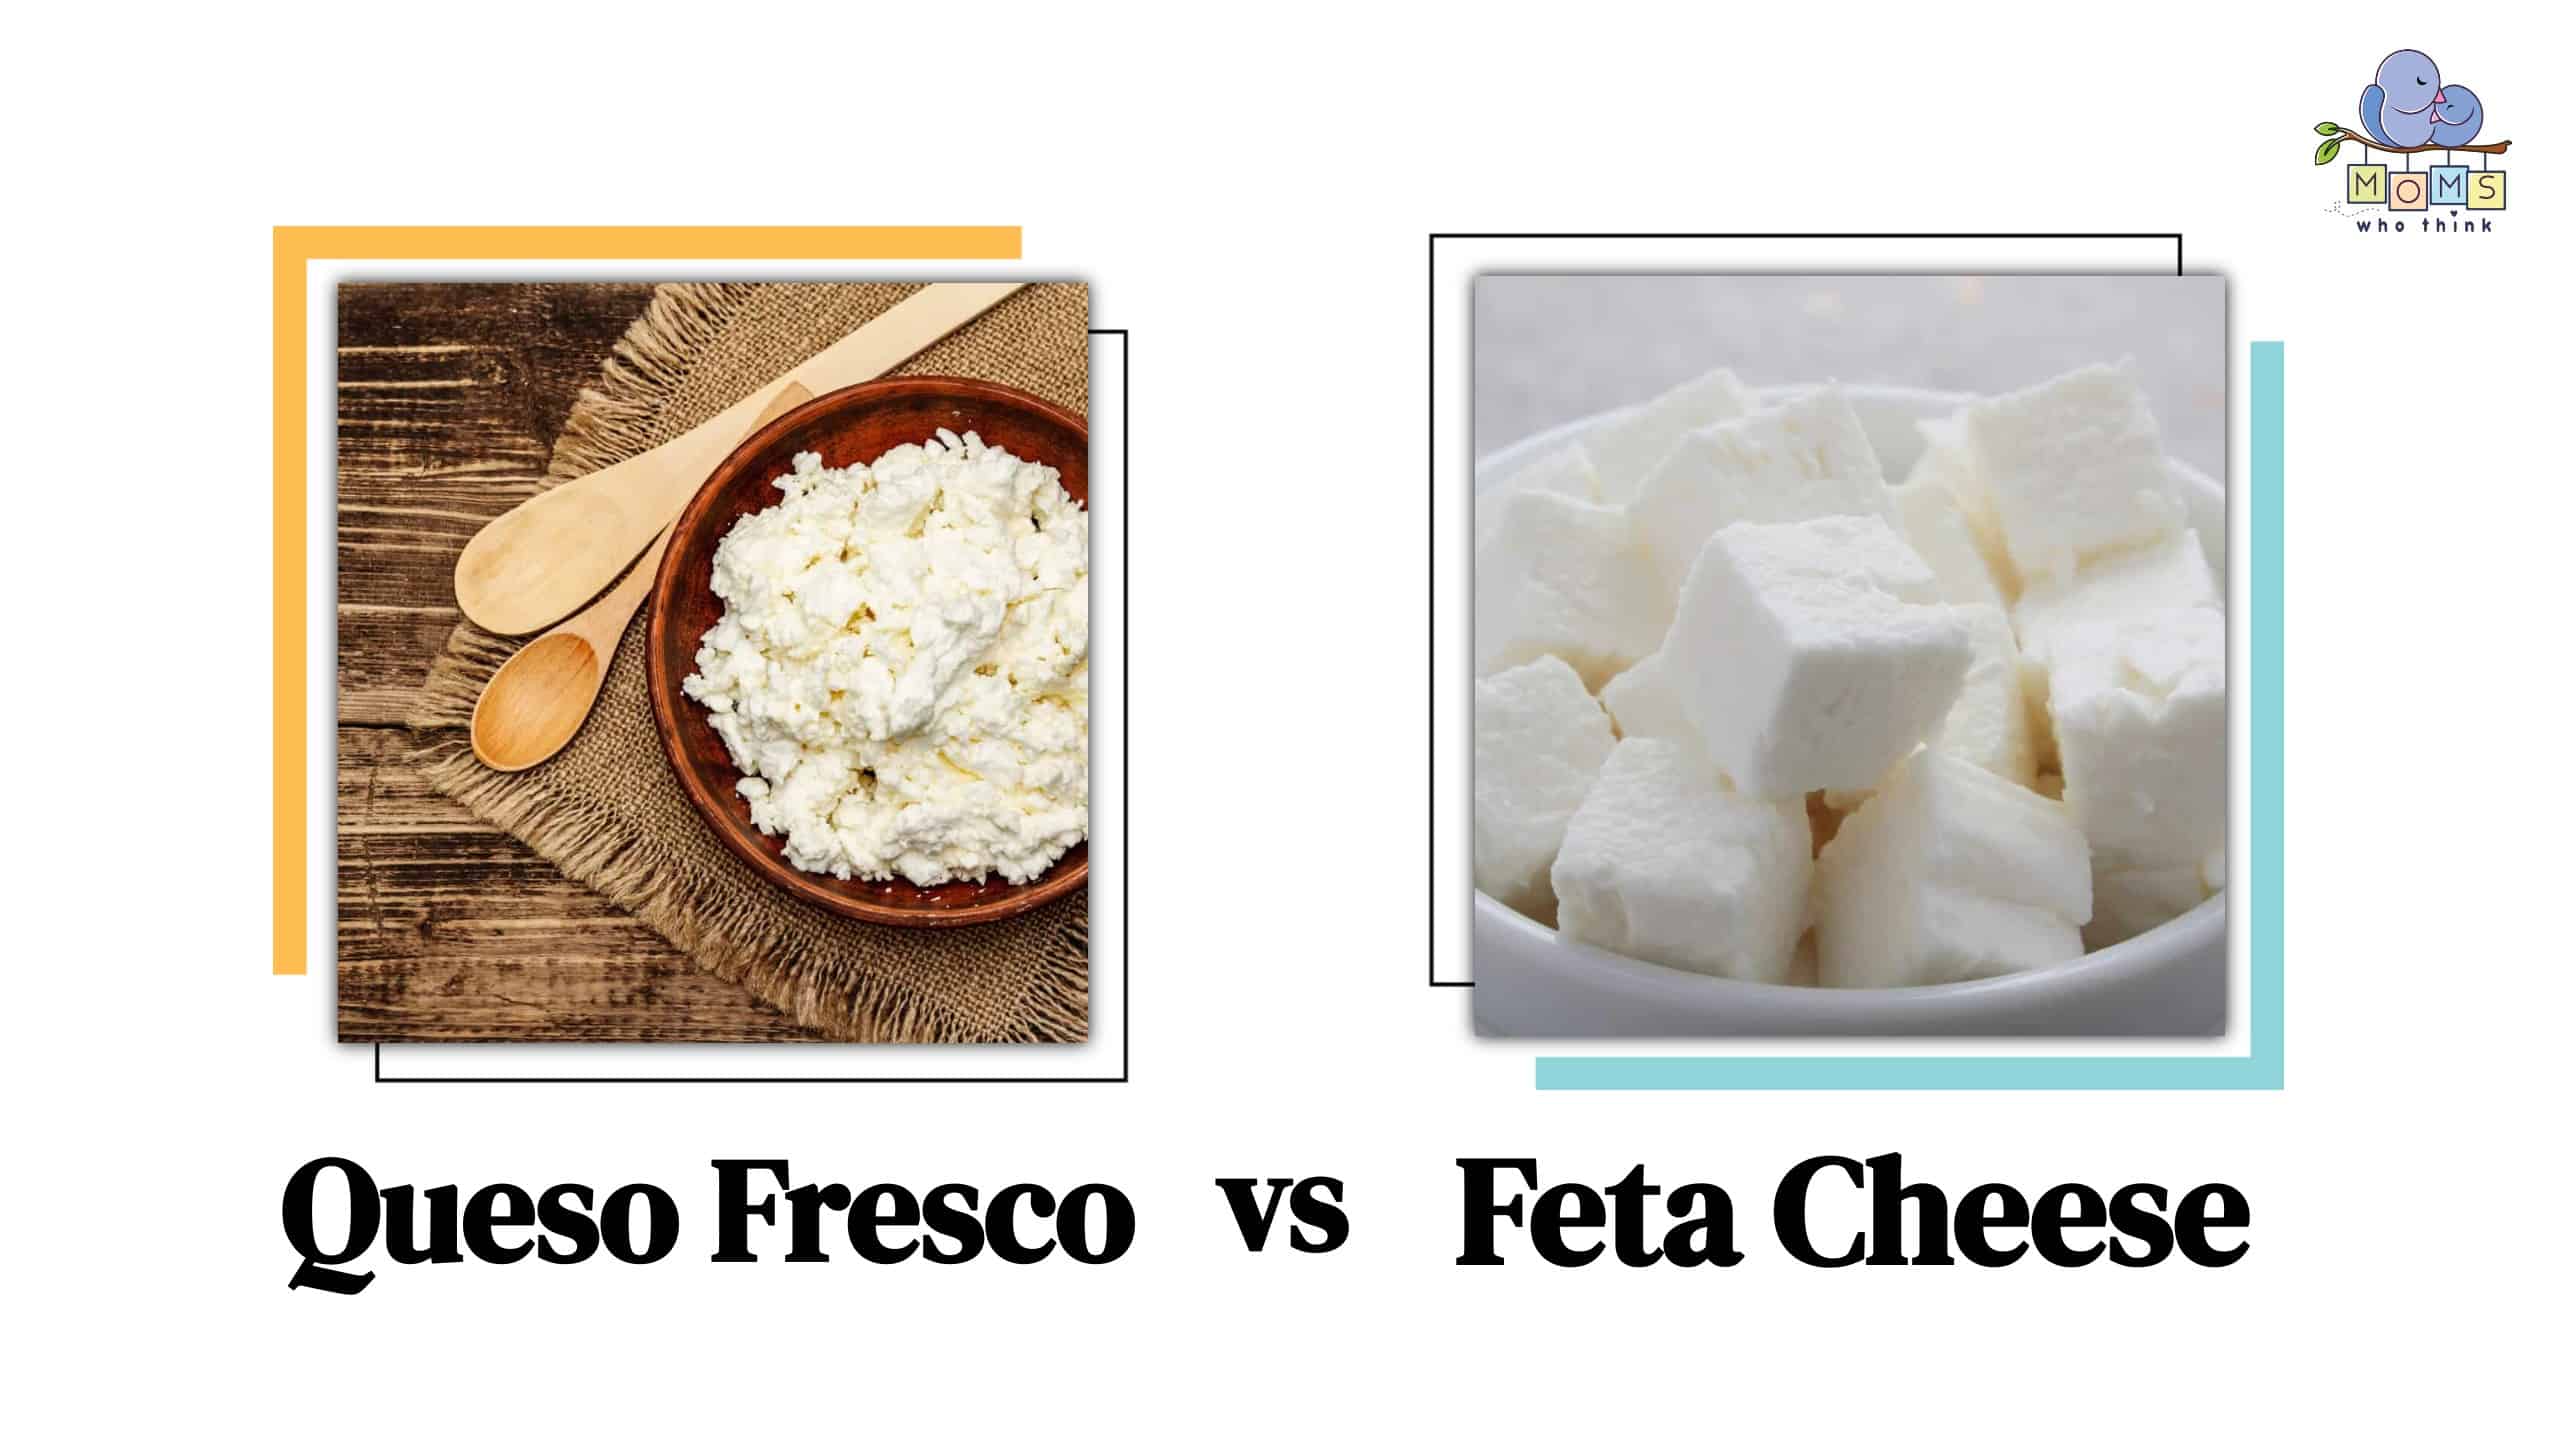 Queso Fresco vs. Feta Cheese: How Are They Different?